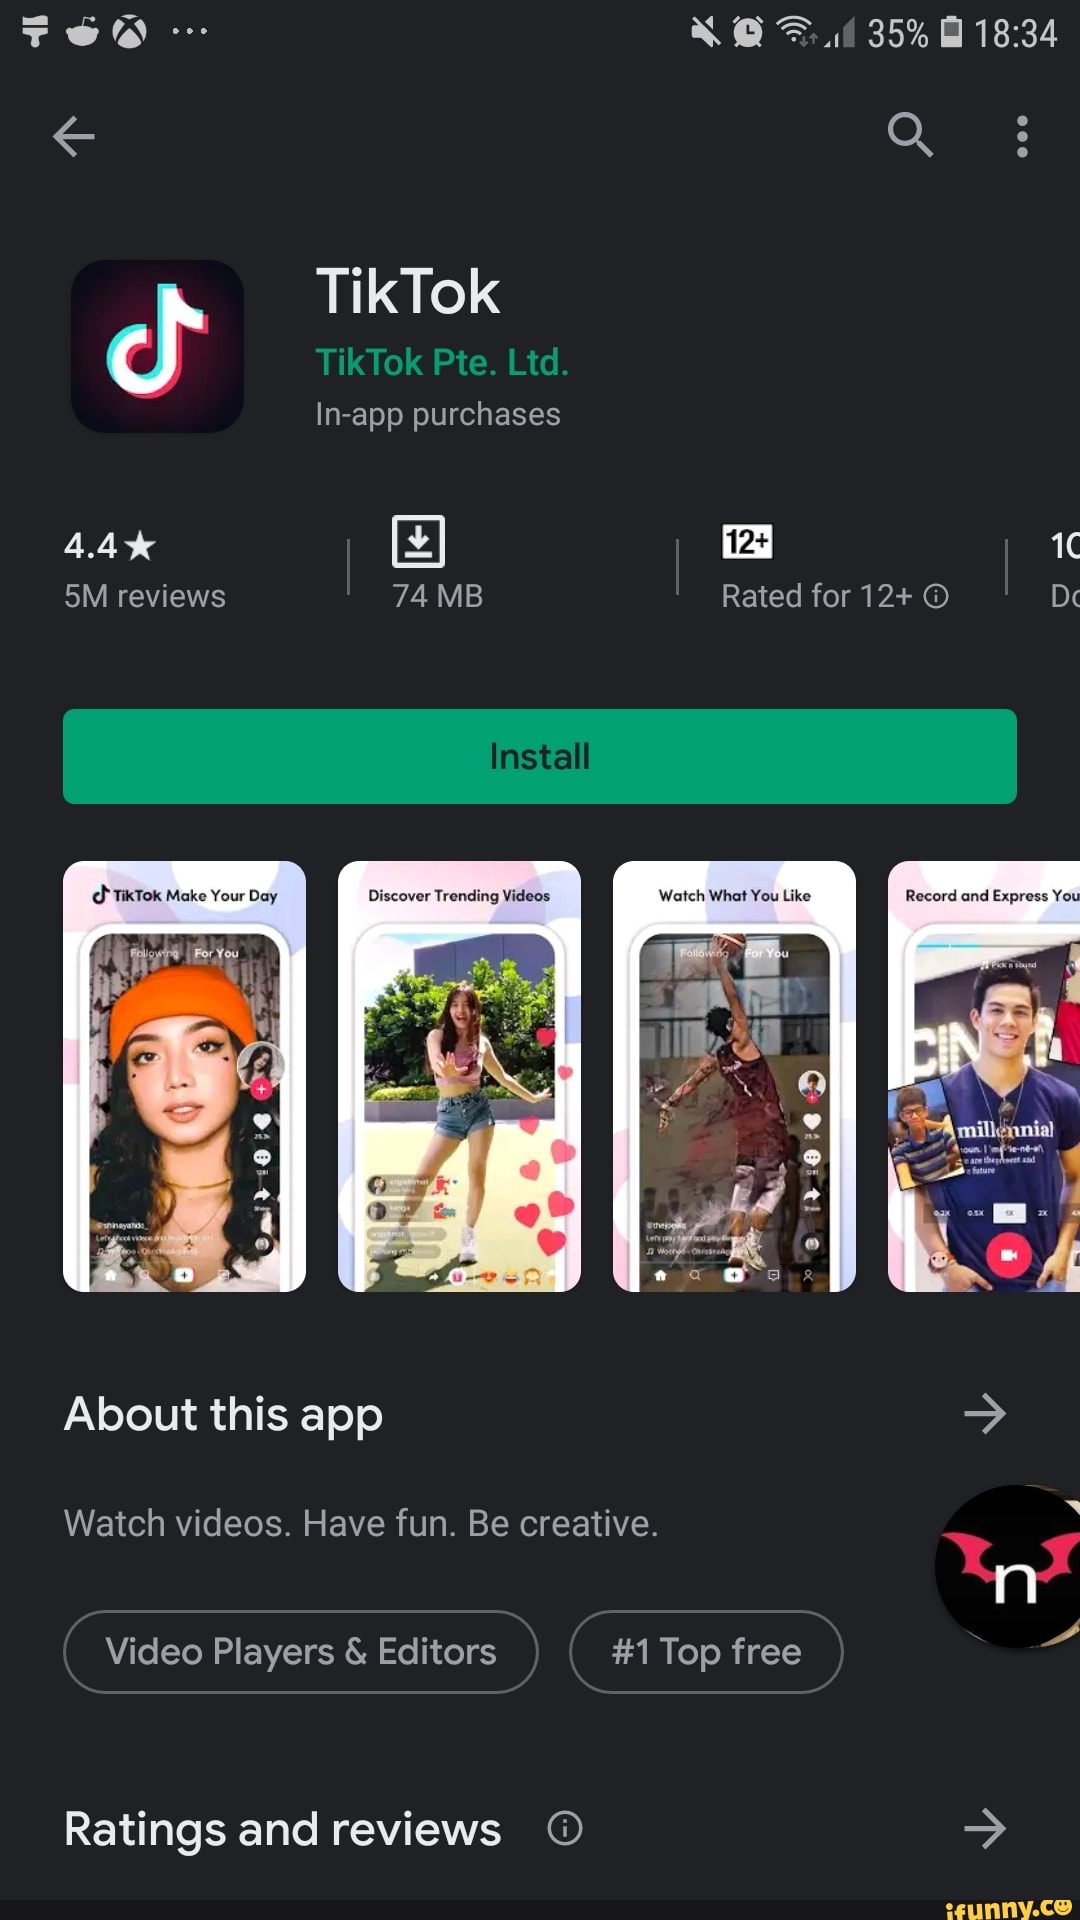 TikTok Te reviews 74 MB Rated for 12+ TikTok Make Your Day Discover